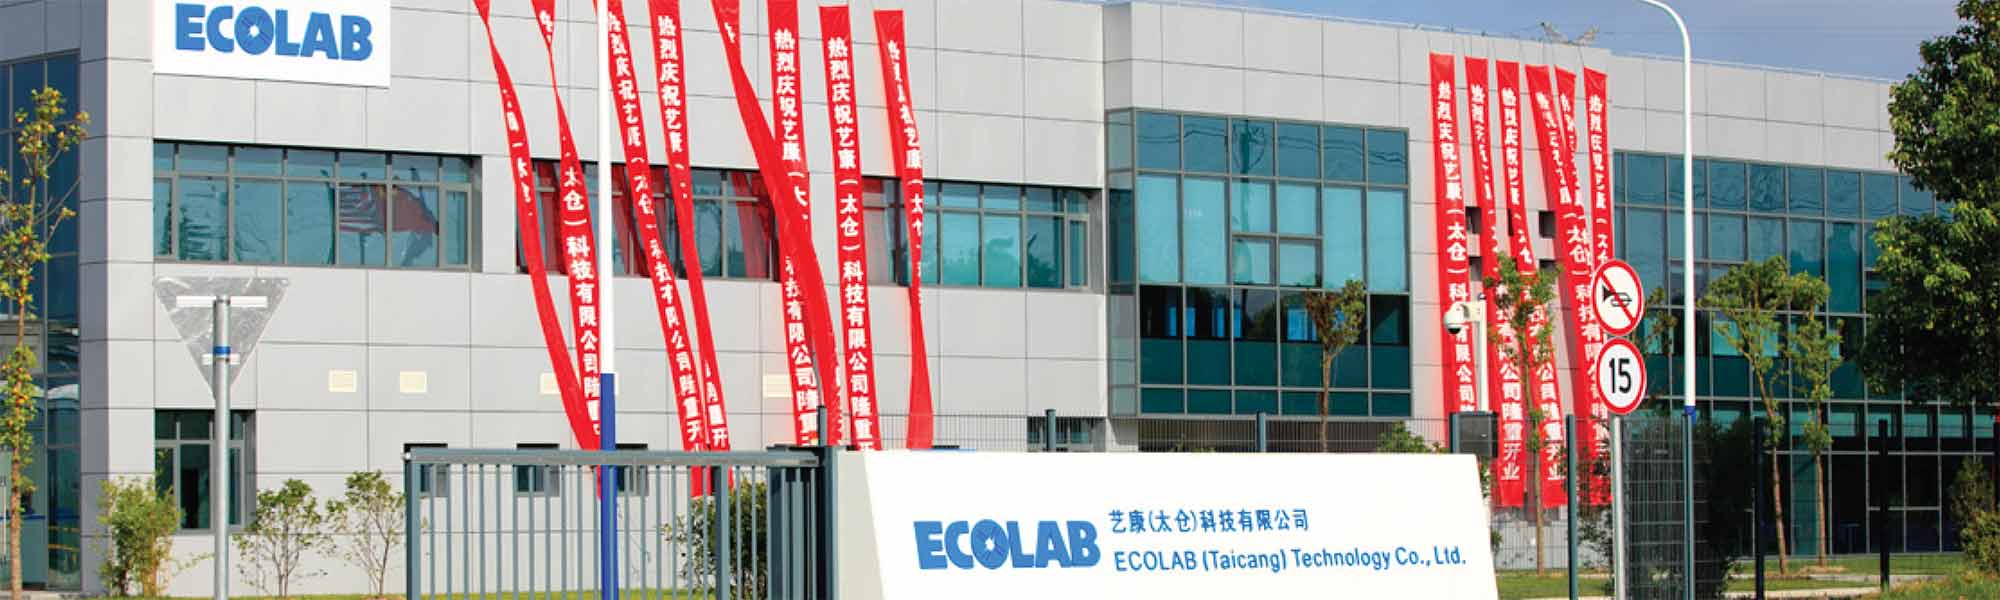 Ecolab Manufacturing Plant in Taicang, China, Certified as Water Stewardship Leader